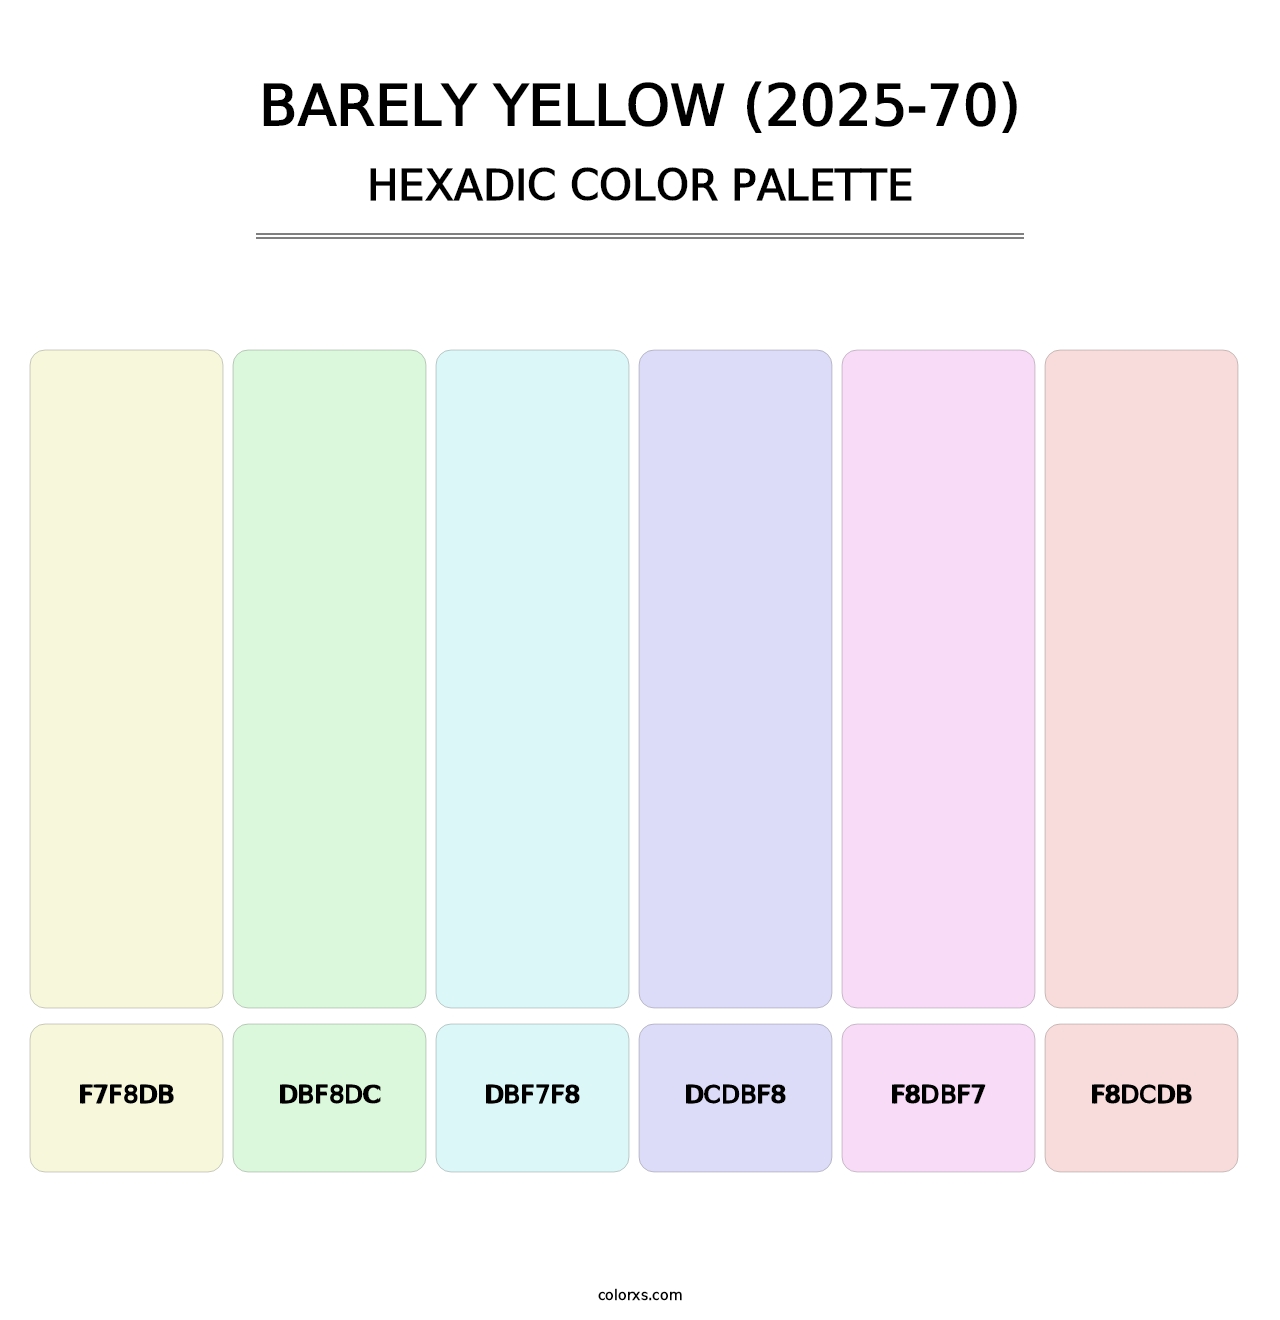 Barely Yellow (2025-70) - Hexadic Color Palette